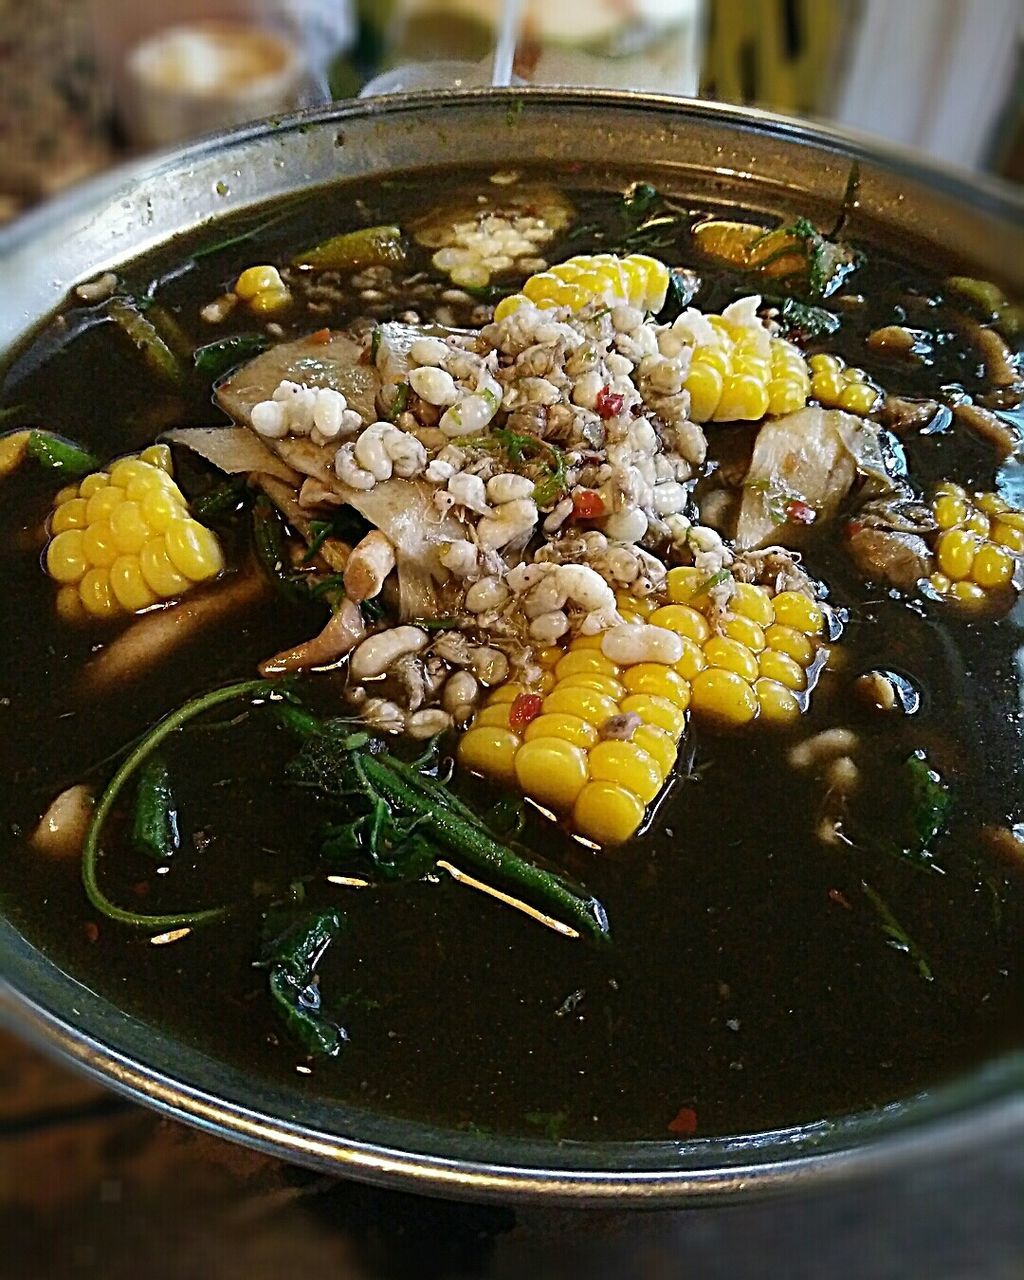 CLOSE-UP OF YELLOW FOOD ON TRAY